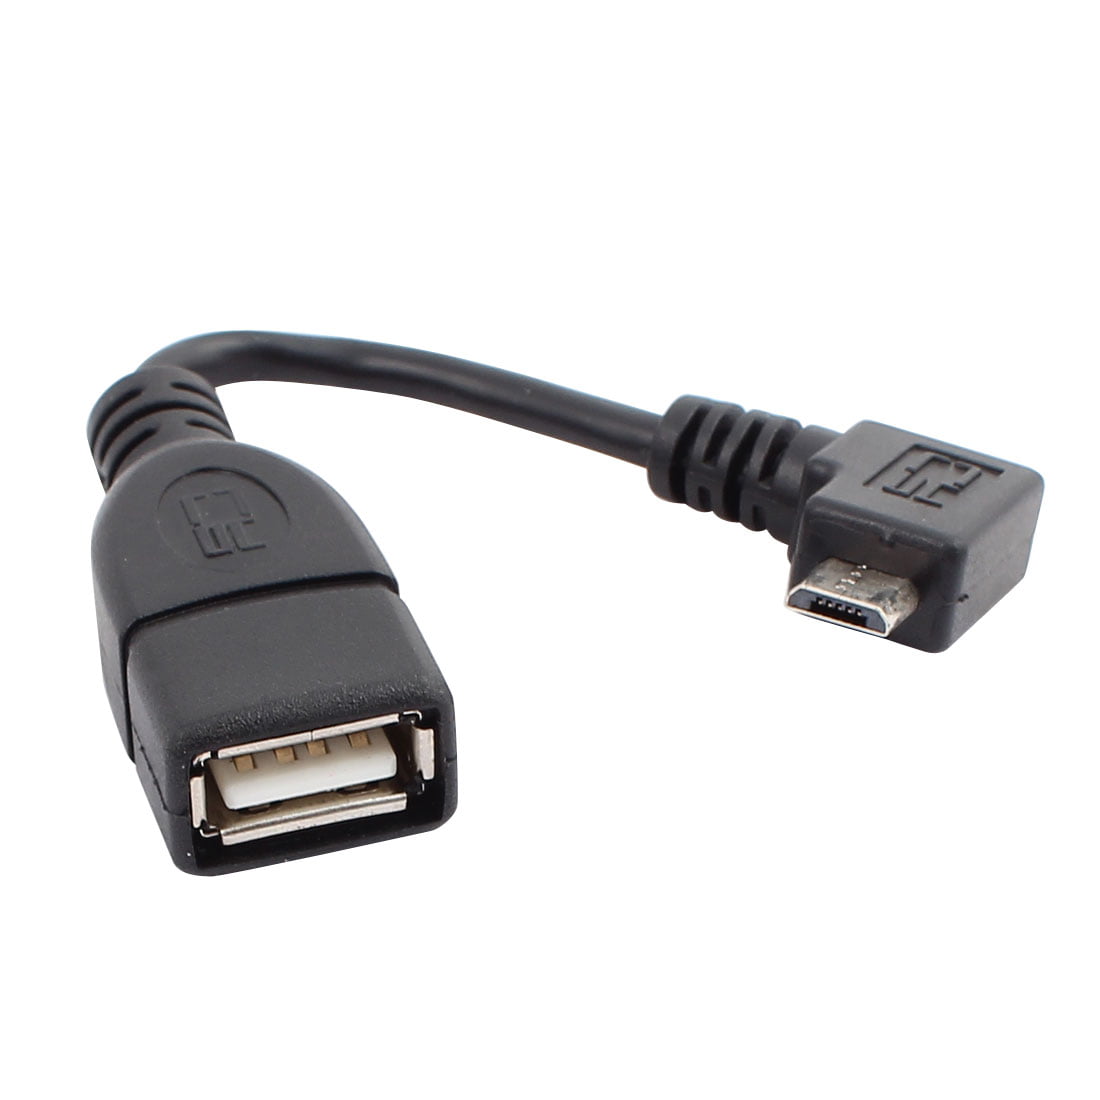 10pcs Mini 5 Pin USB Male Right Angle To USB 2.0 A Female OTG Host Adapter Cable 